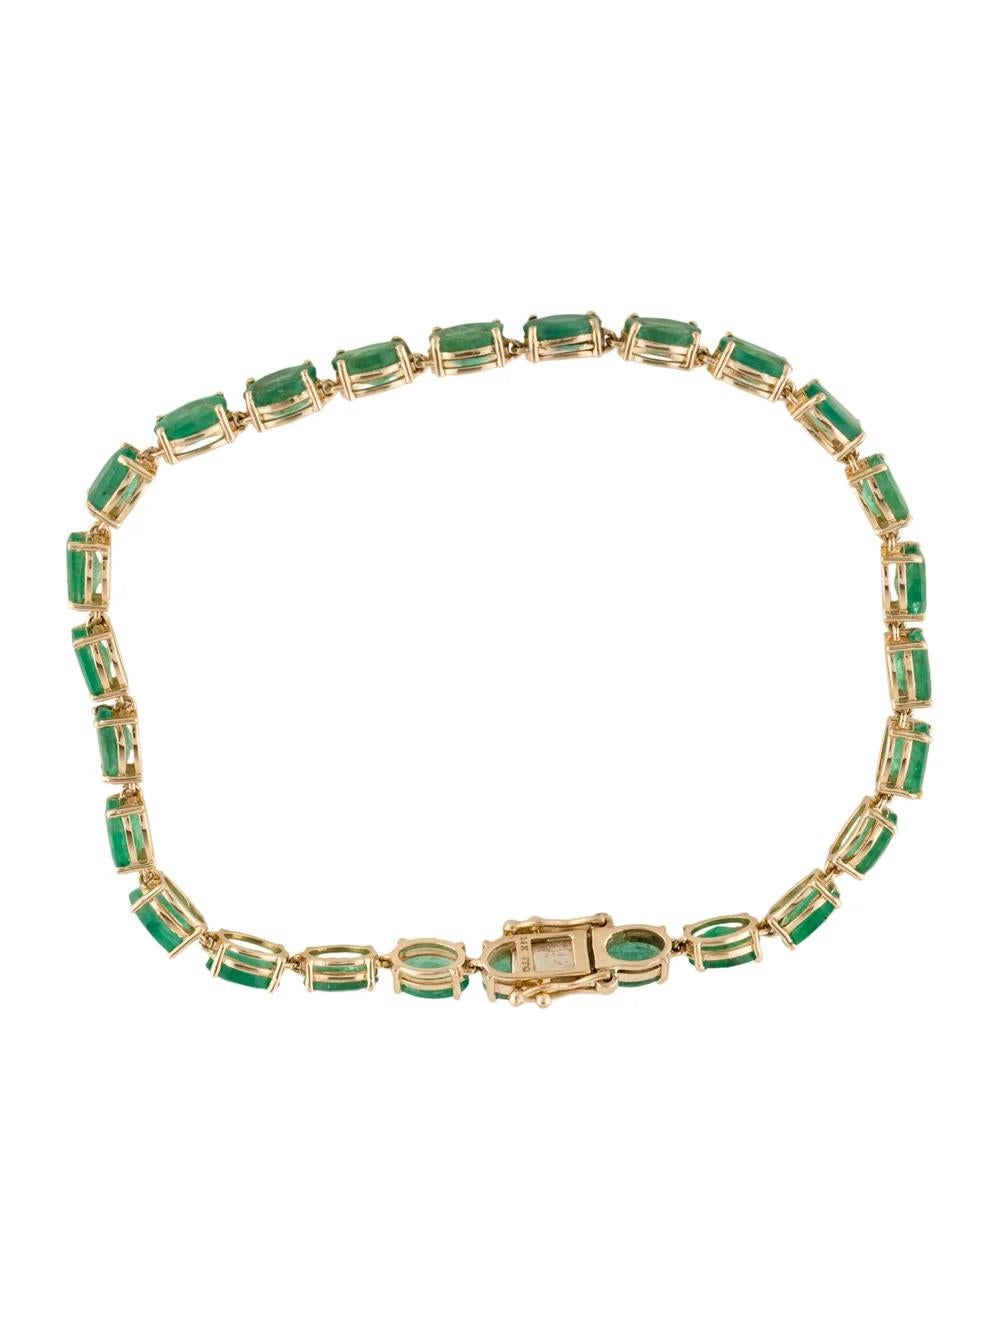 14K Gold 10.40ctw Emerald Link Bracelet - Fine Jewelry Piece, Stunning Design In New Condition For Sale In Holtsville, NY